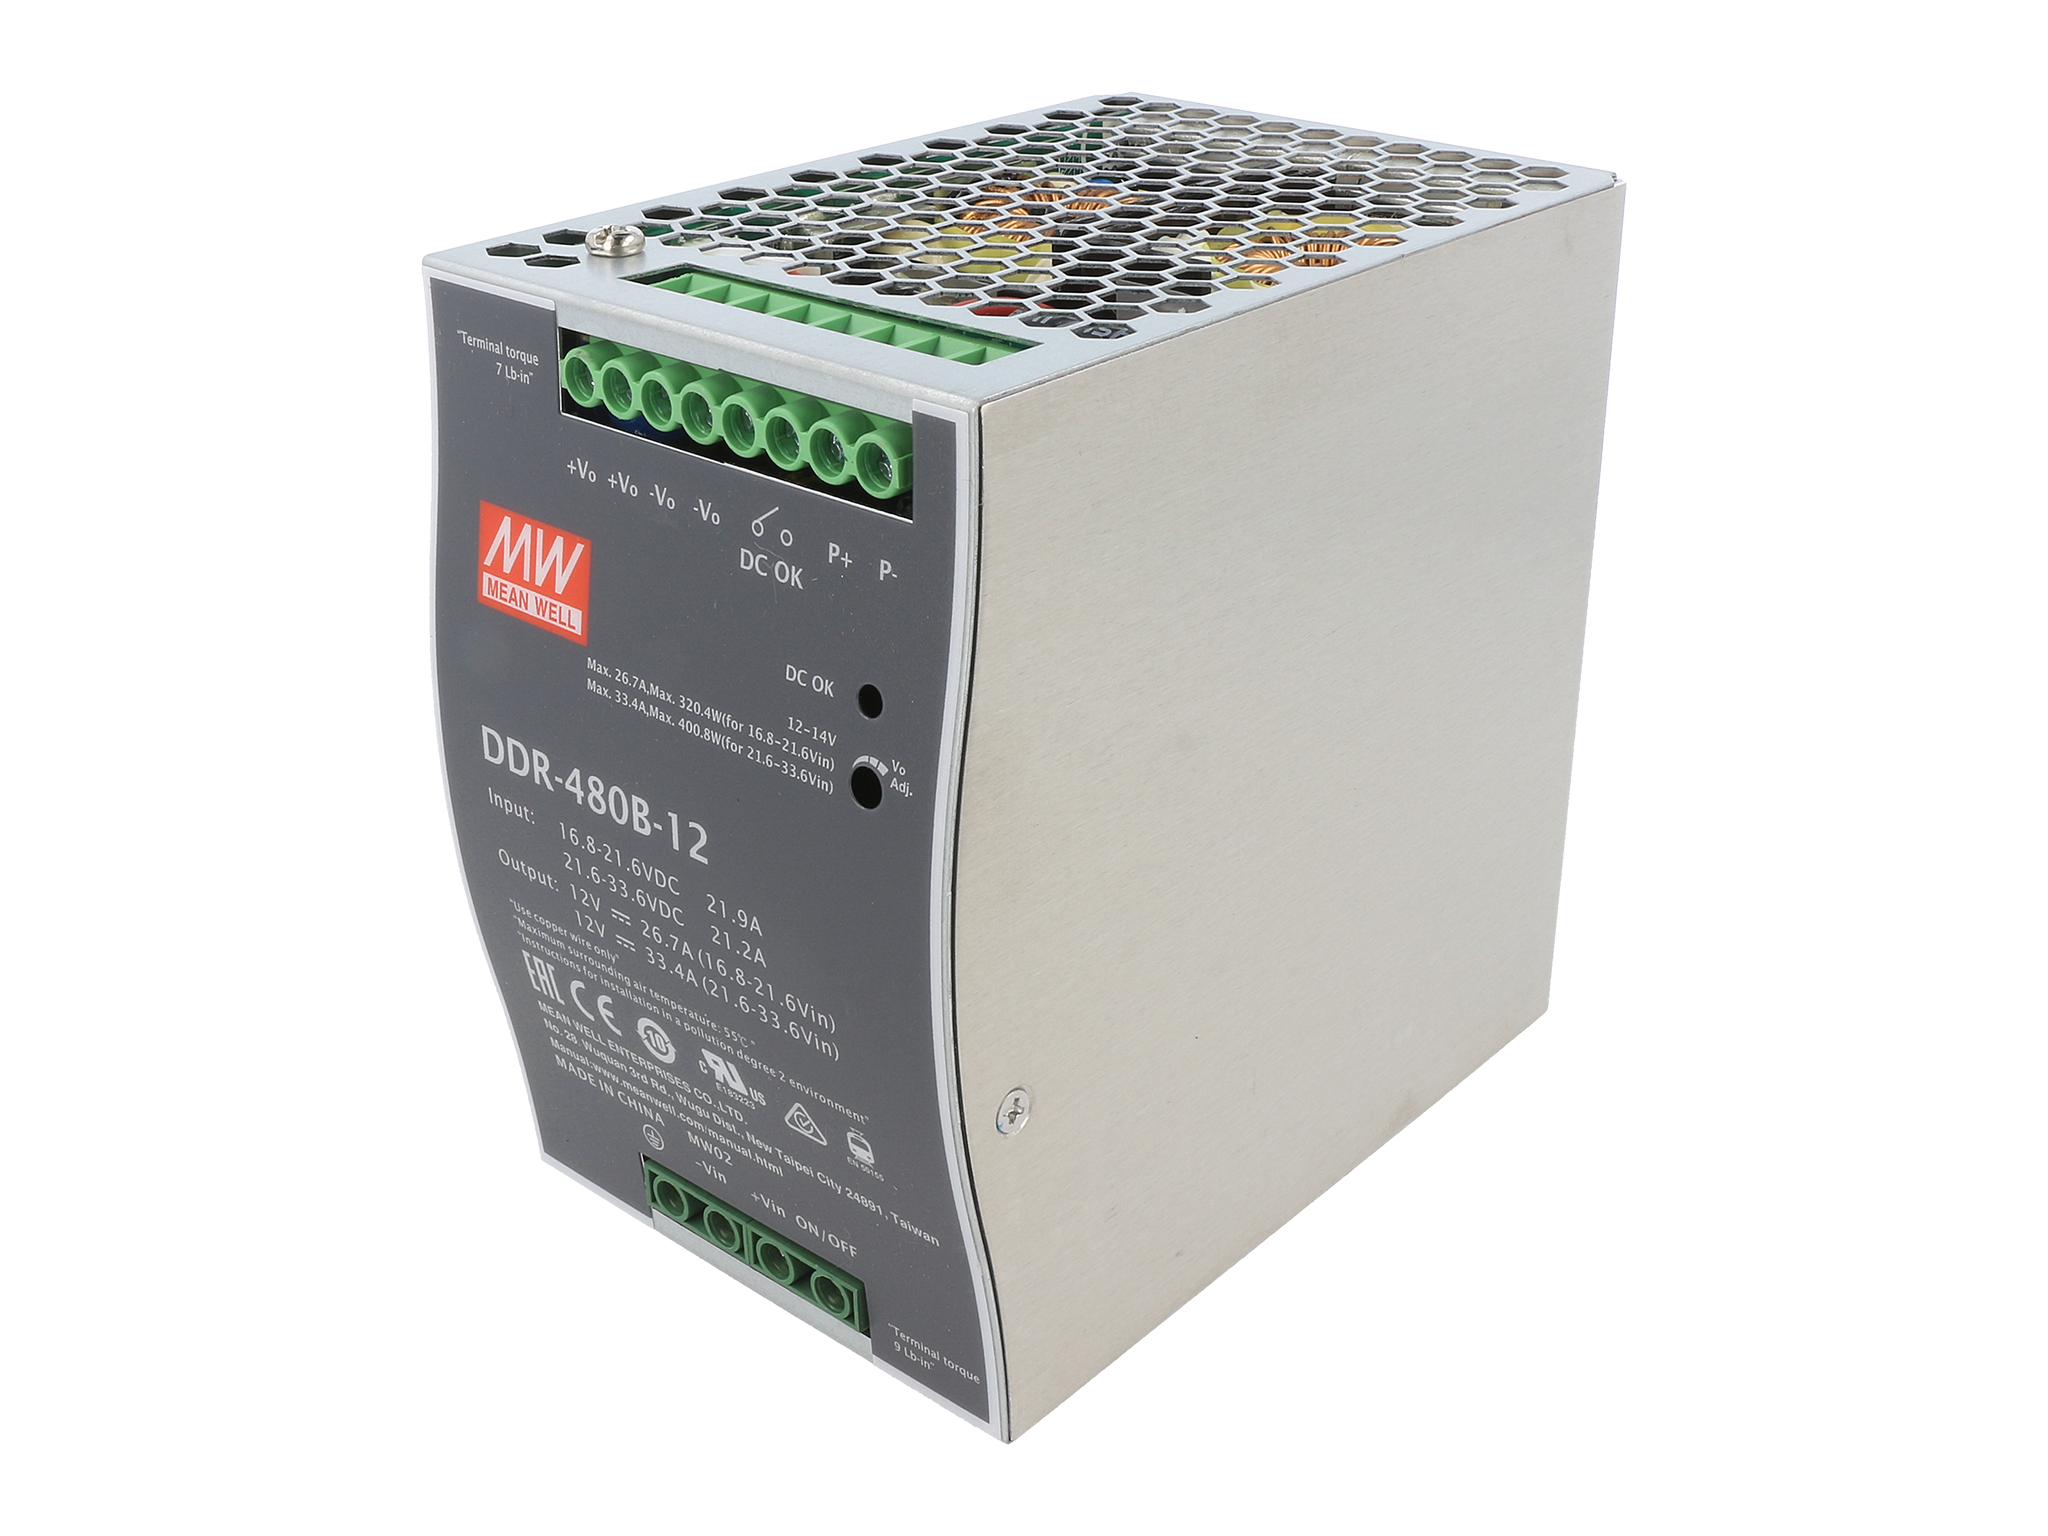 Quality Power Supplies and Converters